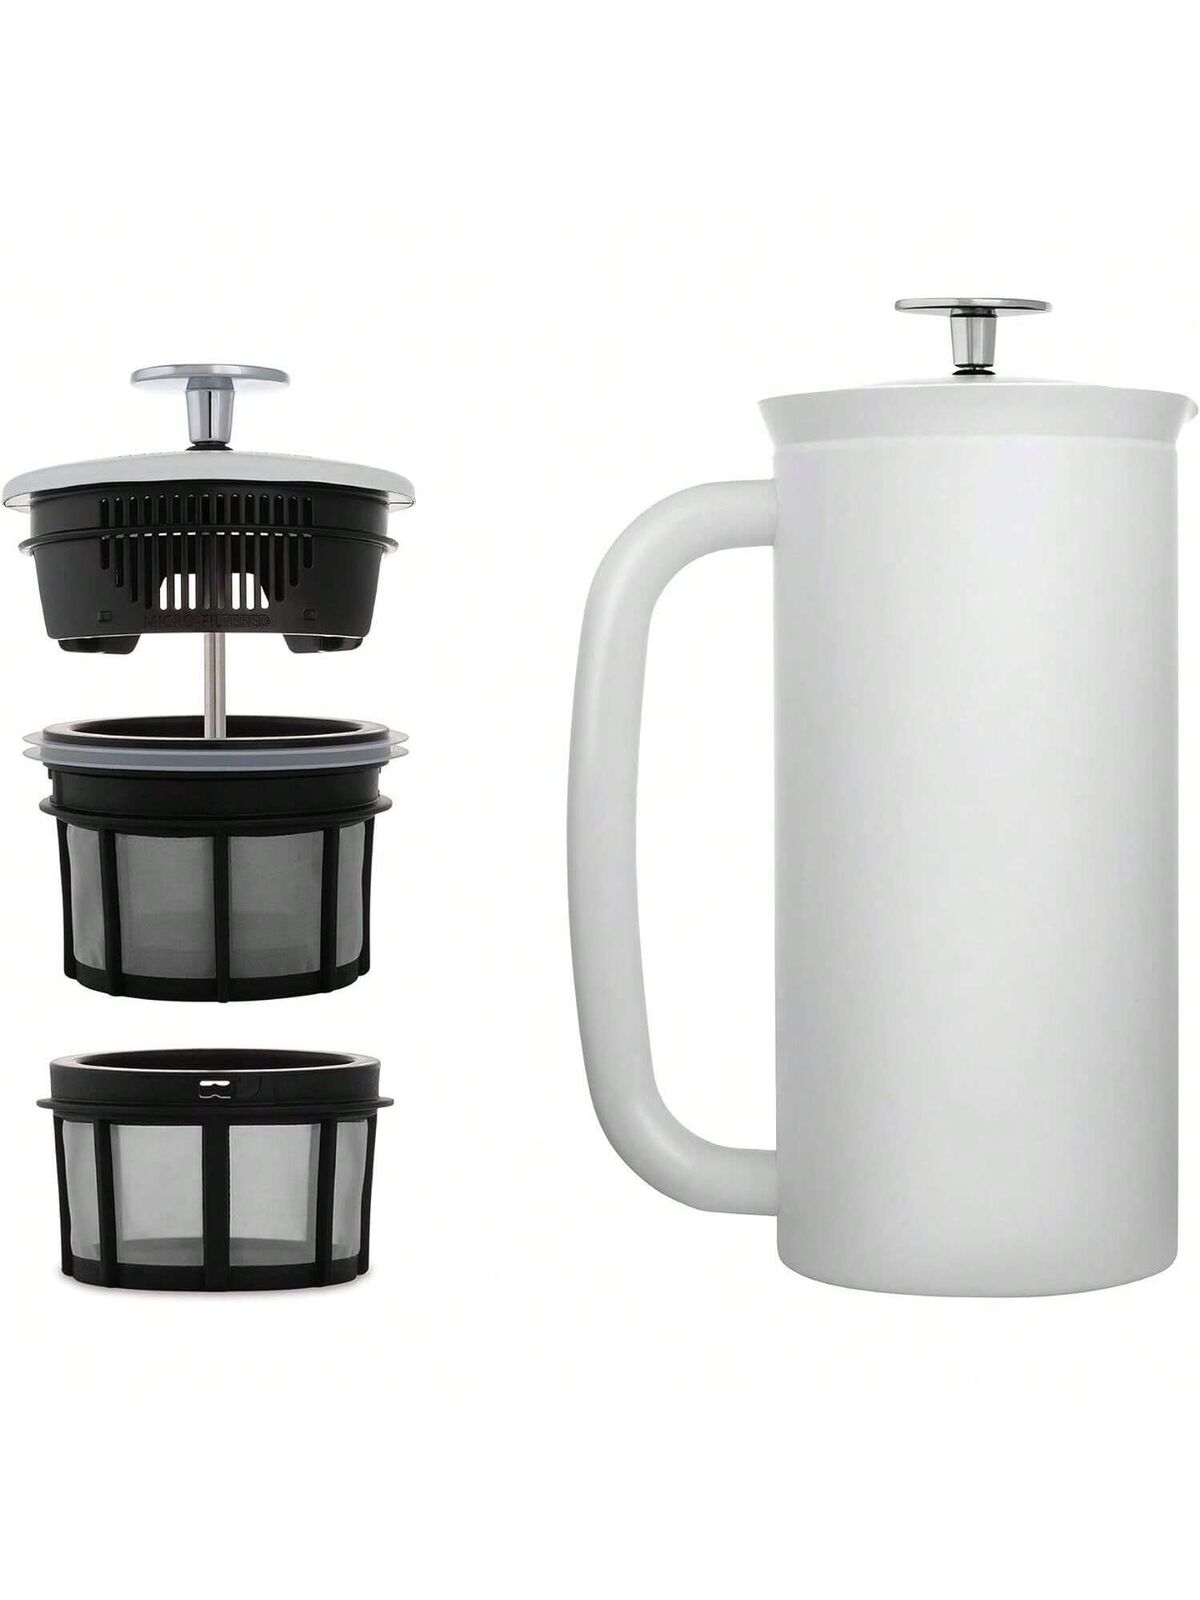 YONGSTYLE - P7 French Press - Double Walled Stainless Coffee and Tea Maker 18 Oz